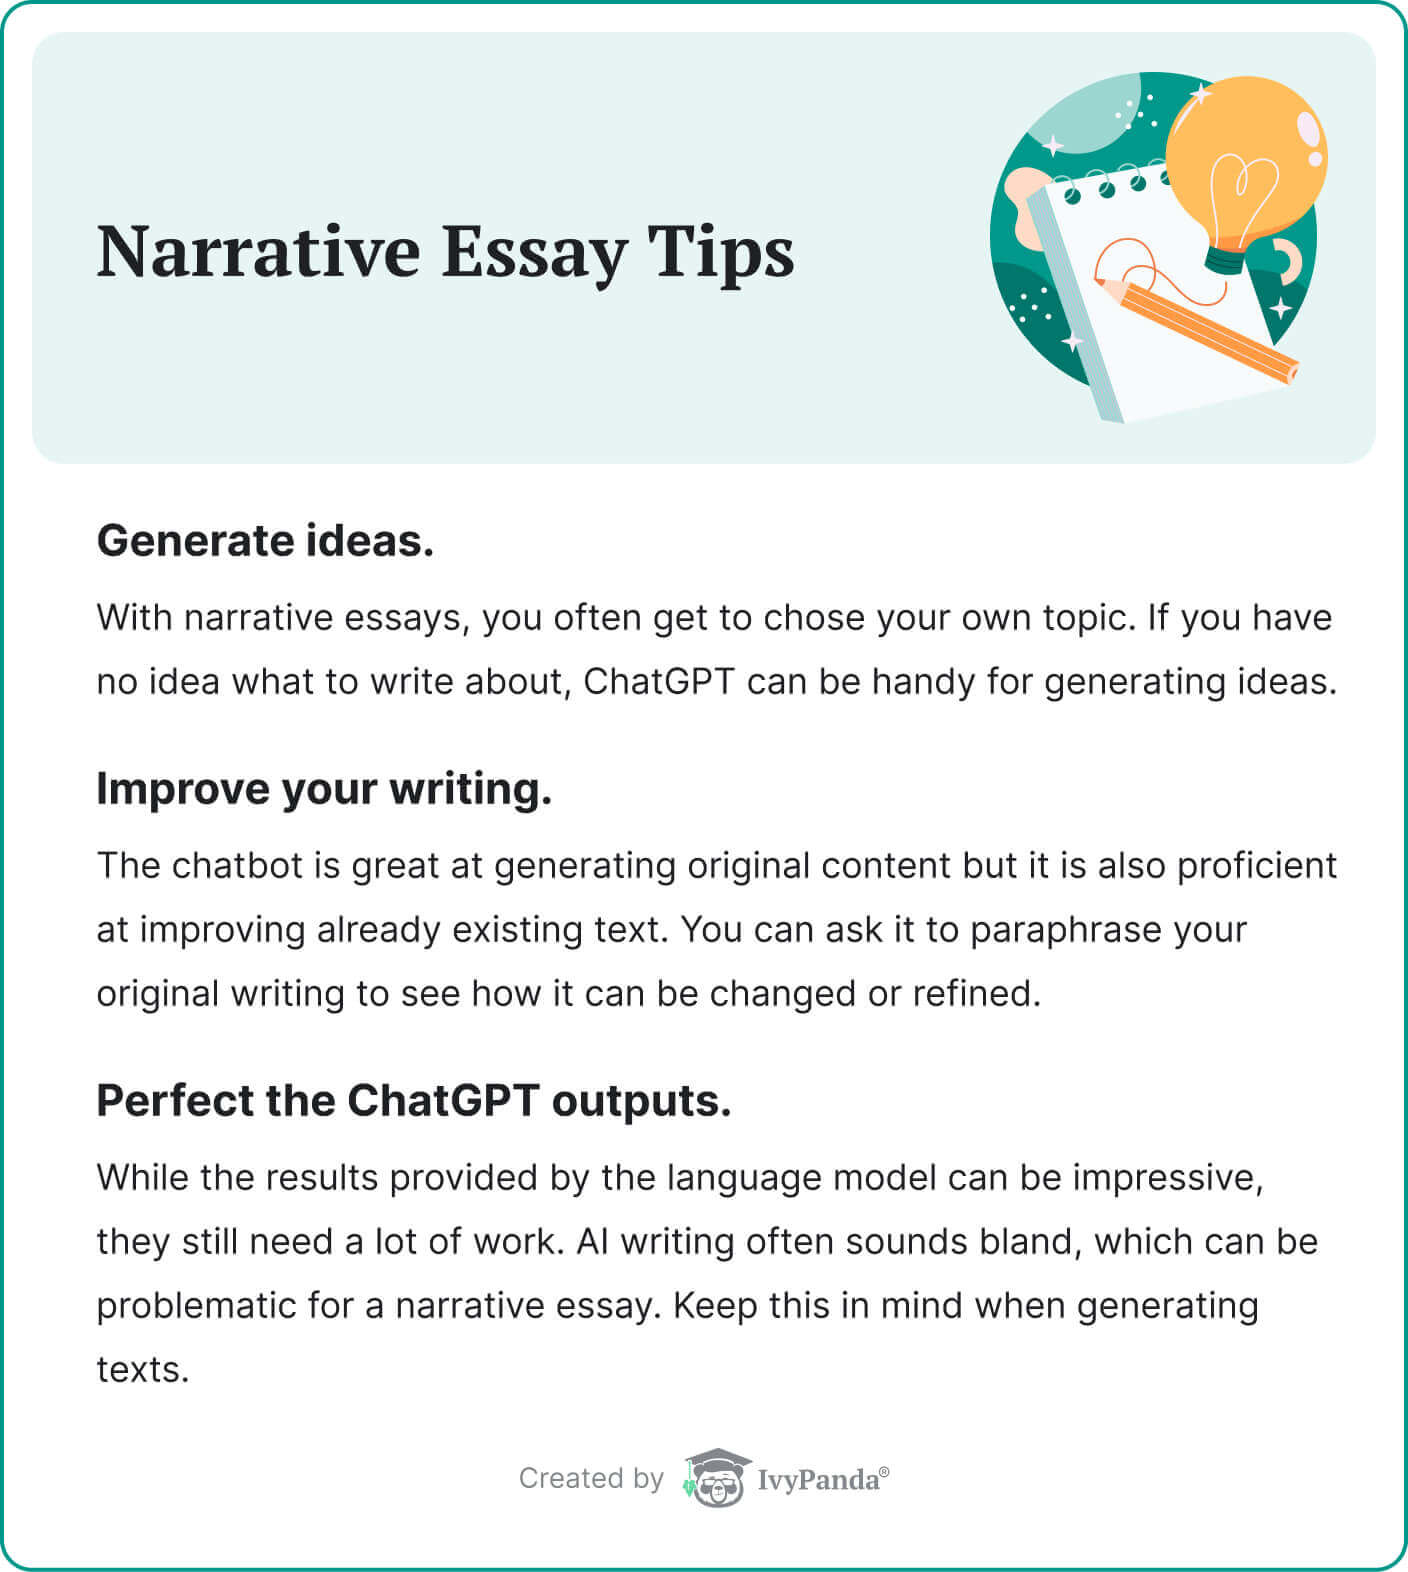 Tips for generating narrative essays in ChatGPT.